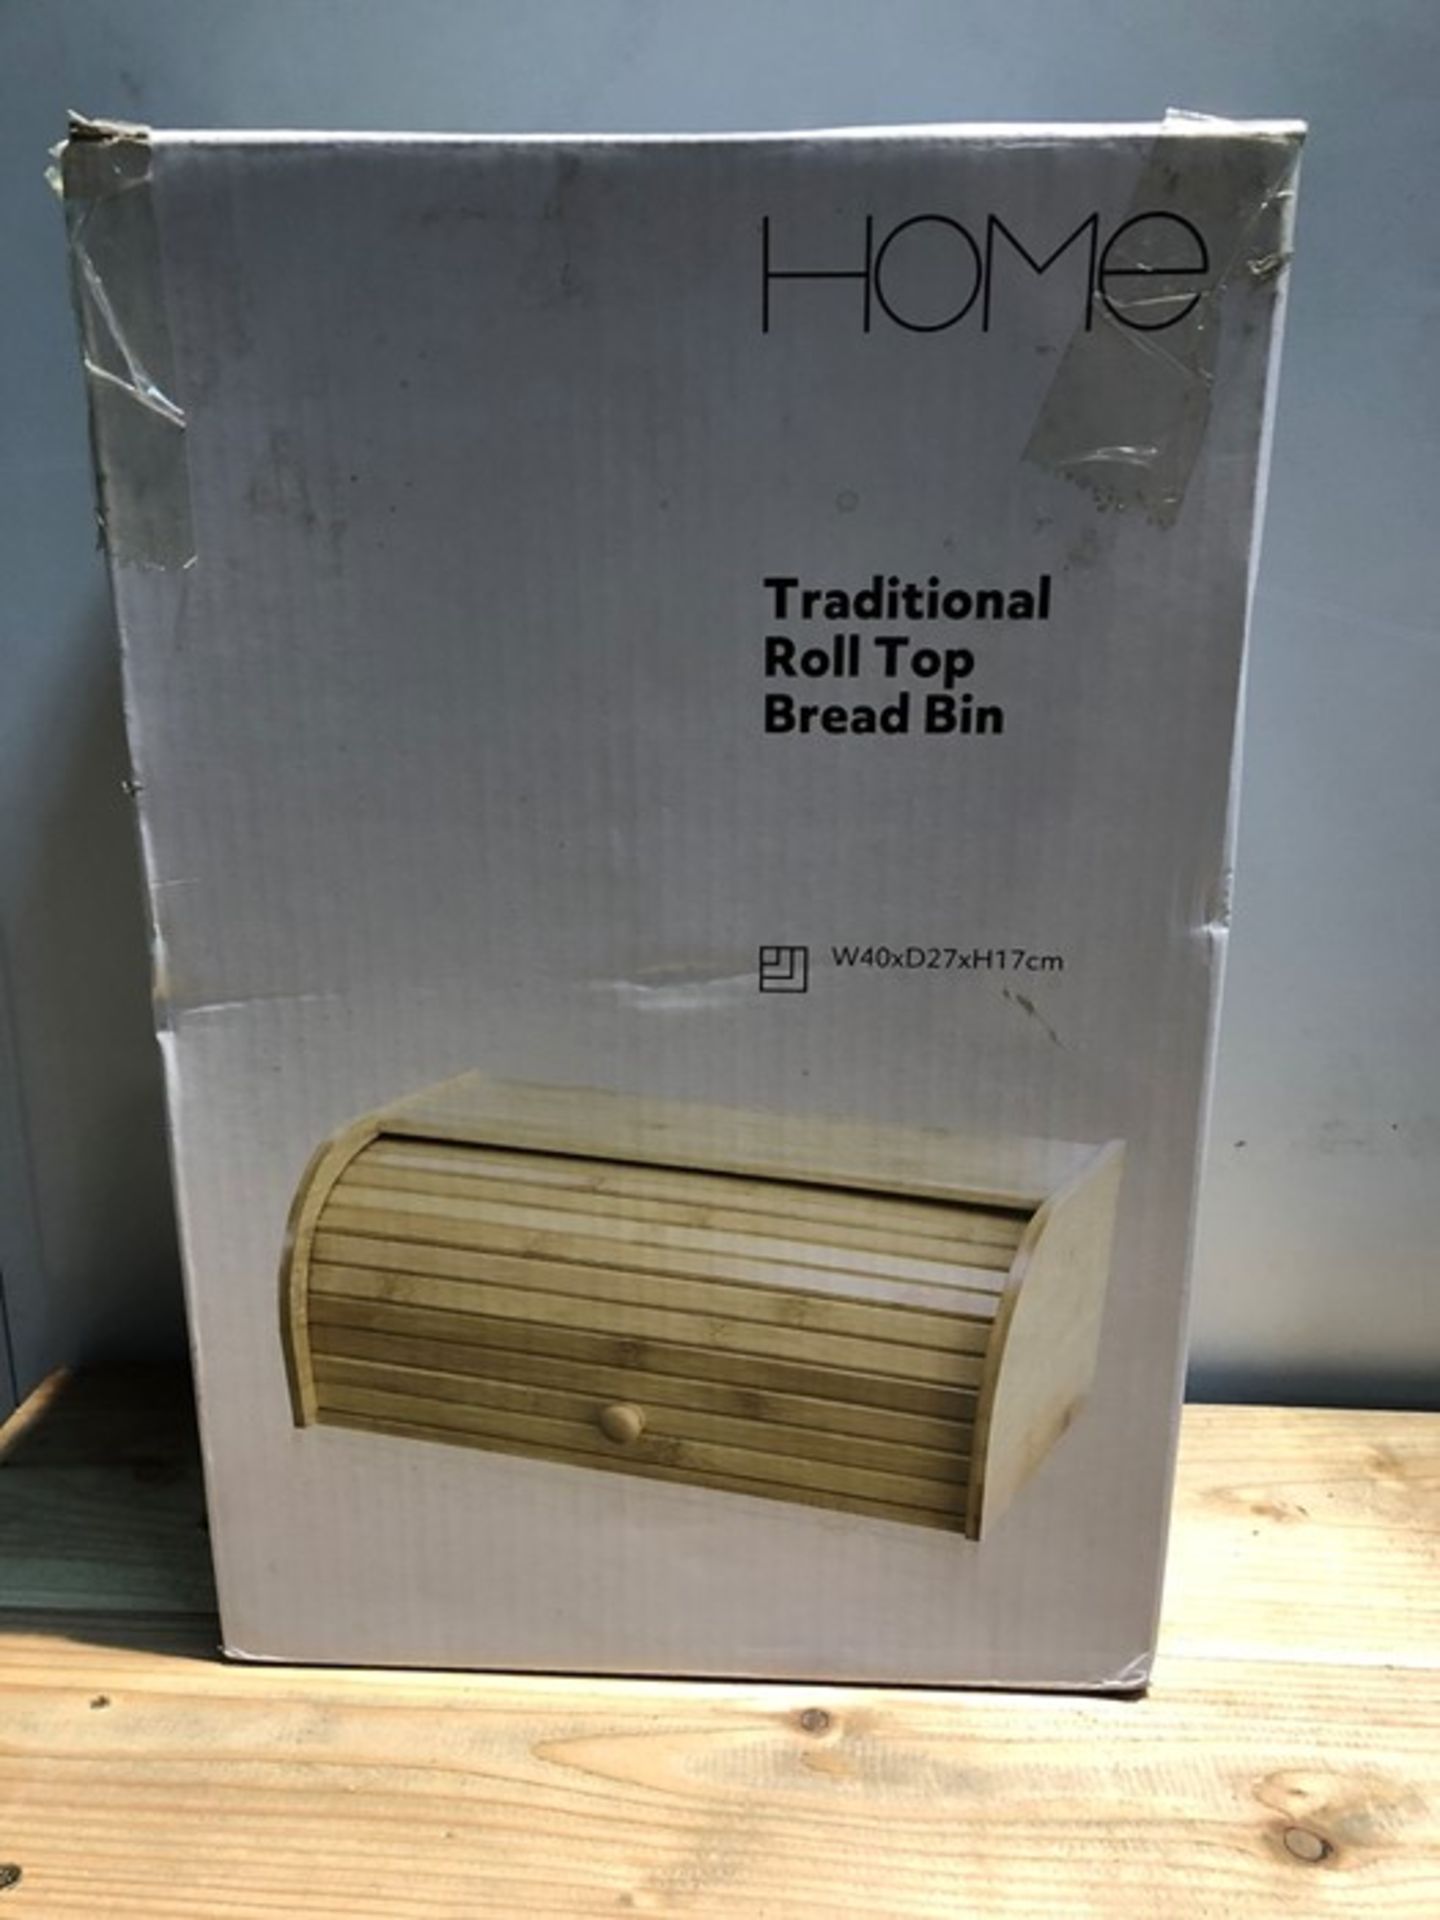 1 BOXED HOME TRADITIONAL ROLL TOP BREAD BIN (PUBLIC VIEWING AVAILABLE)